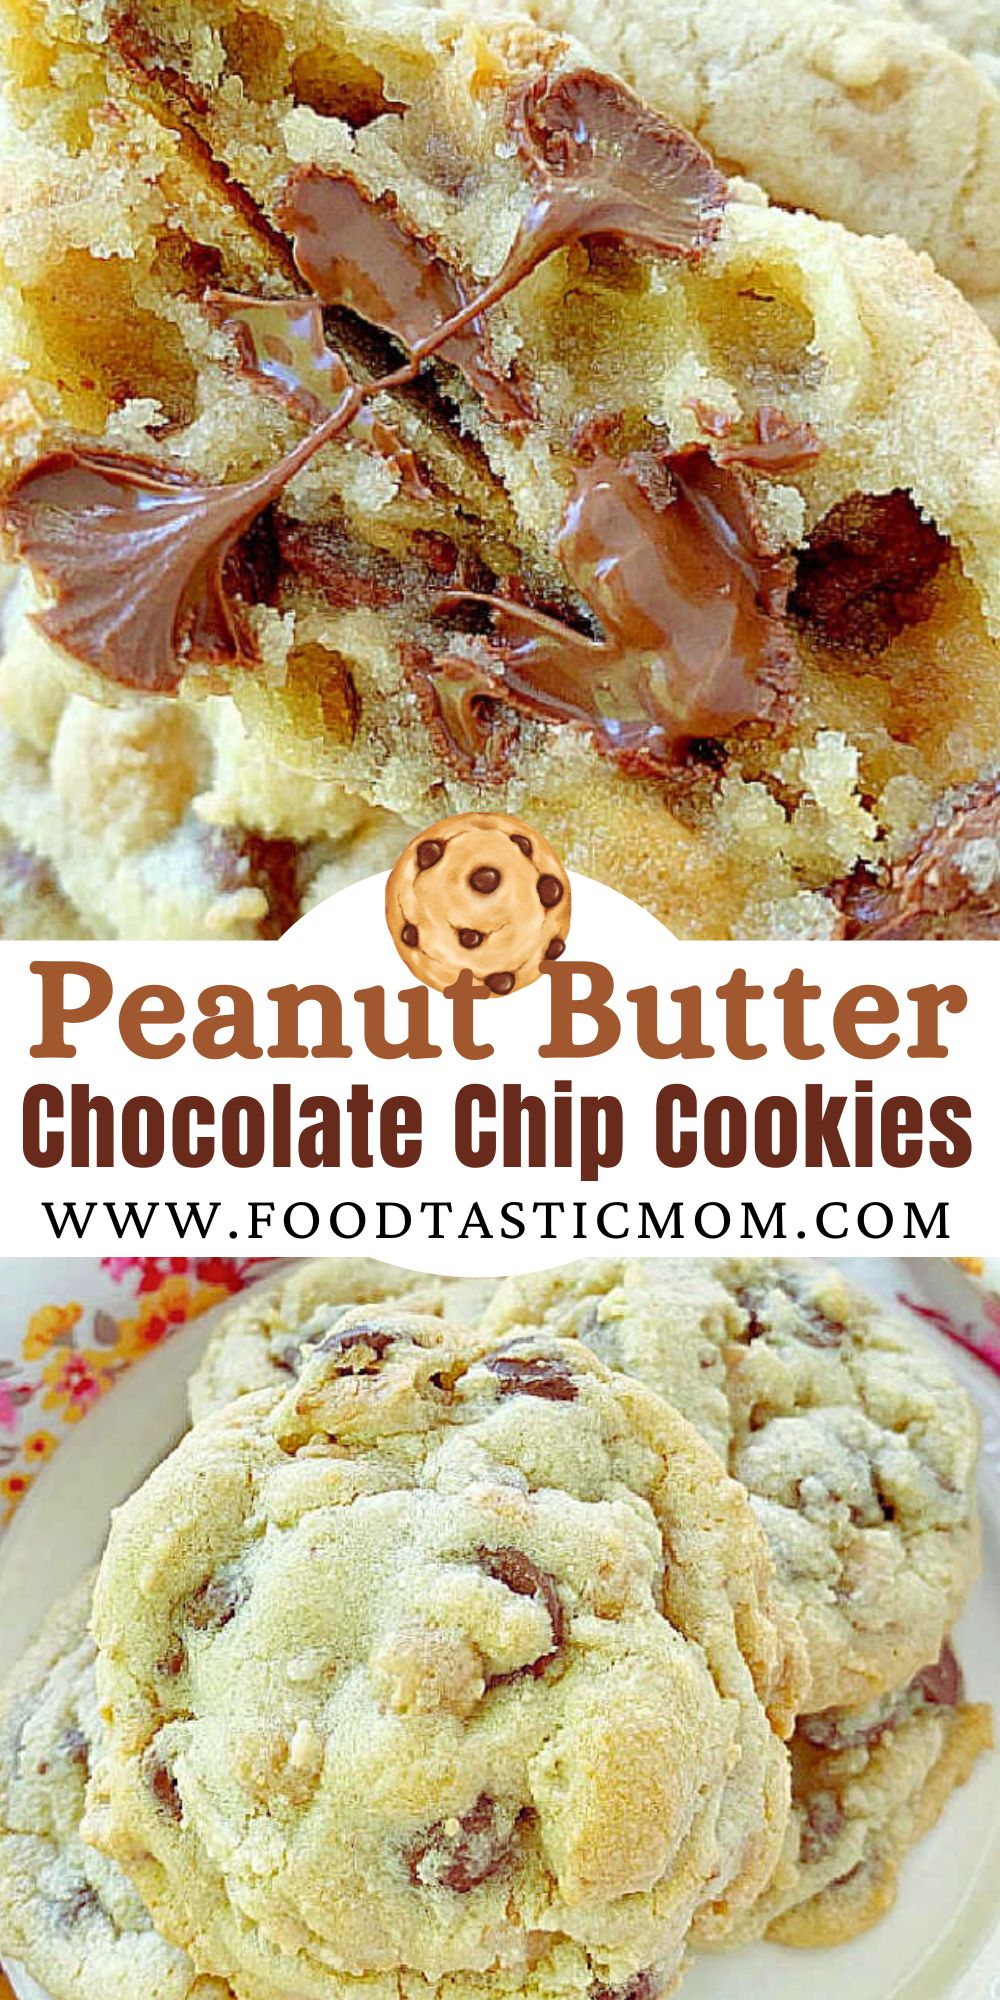 These Chocolate and Peanut Butter Chip Cookies are so good they have been called mind-blowing. Find out all my secrets for the best cookies. via @foodtasticmom